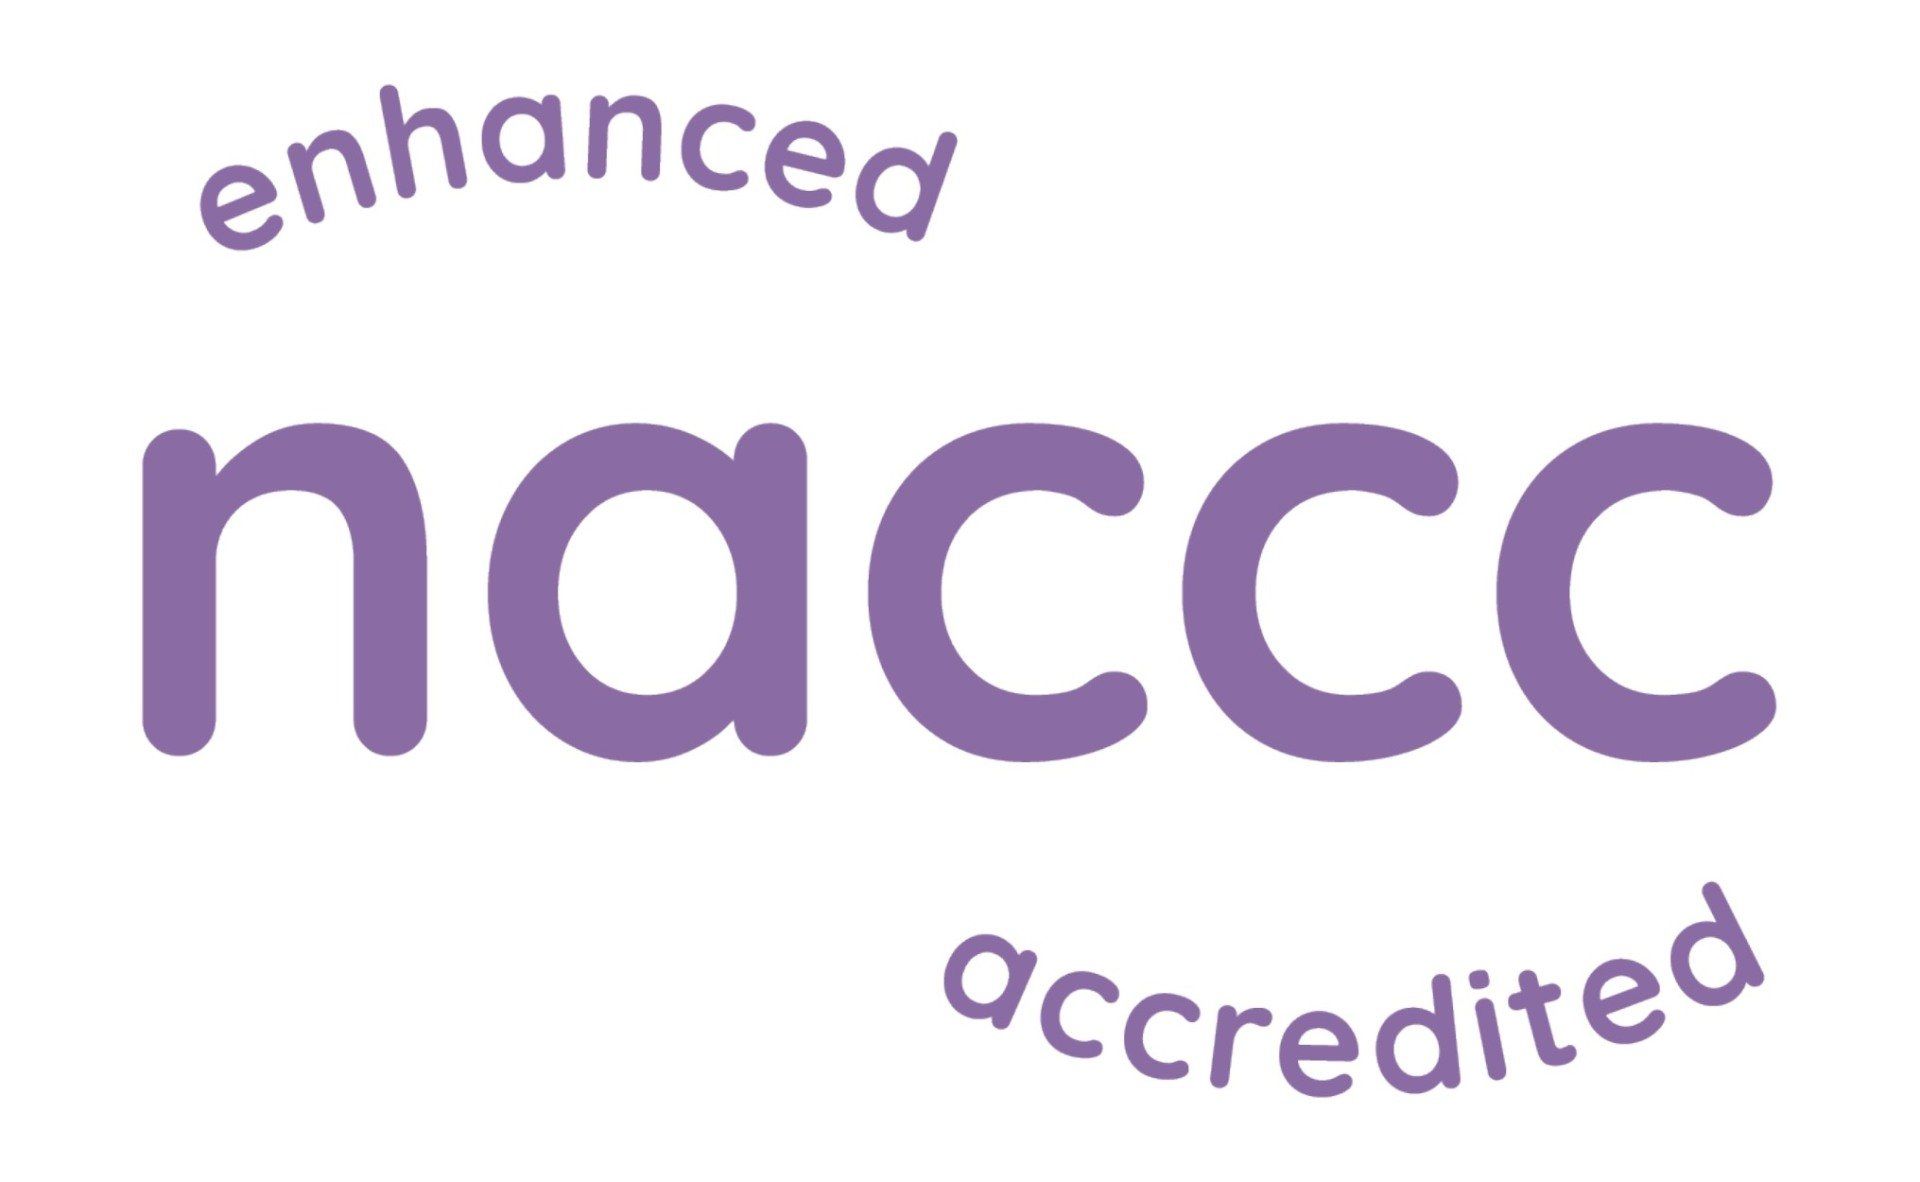 The naccc logo is purple and white and says enhanced accredited.